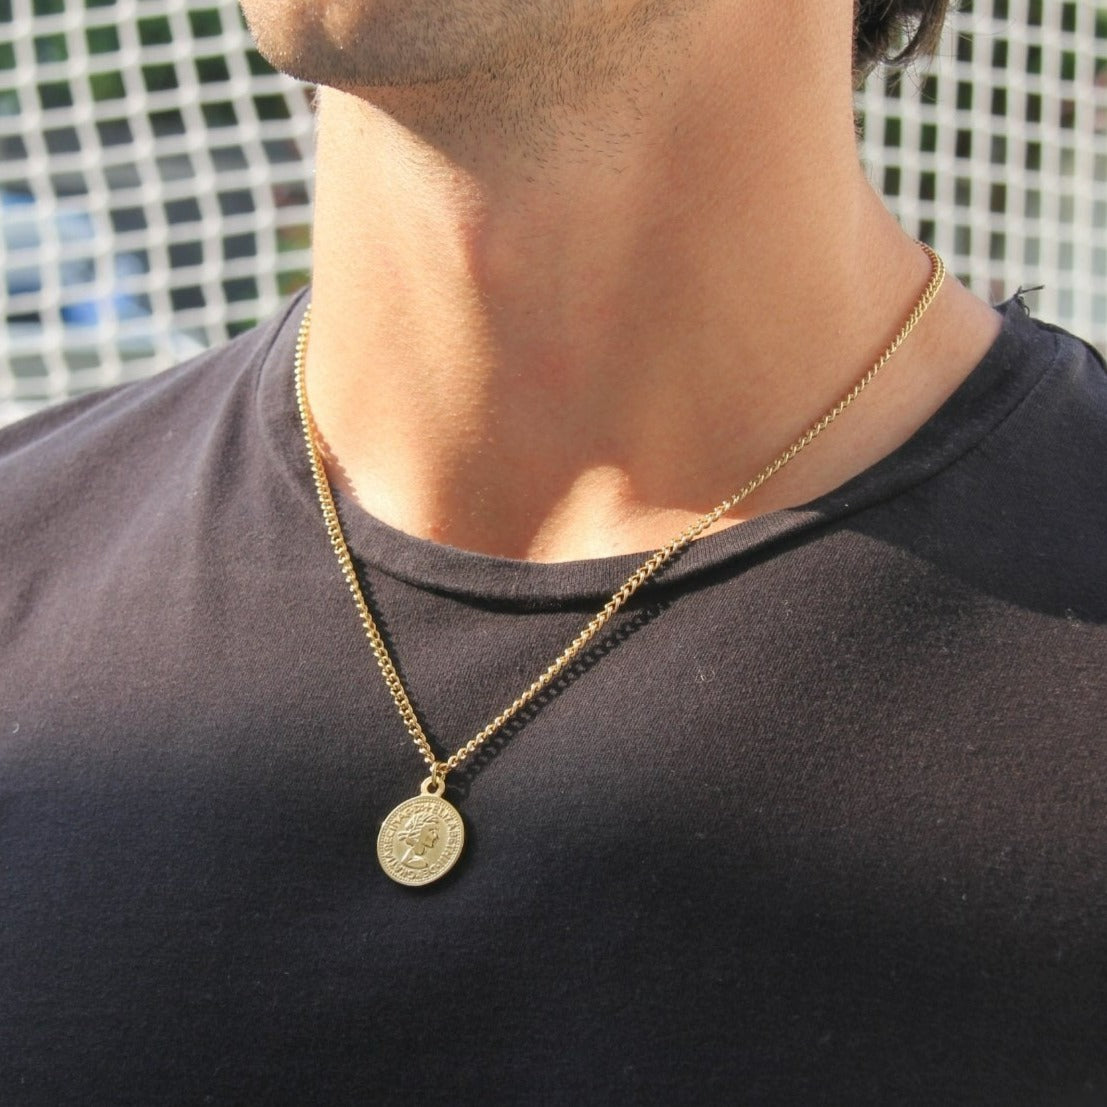 Gold Coin Pendant Necklace For Men or Women